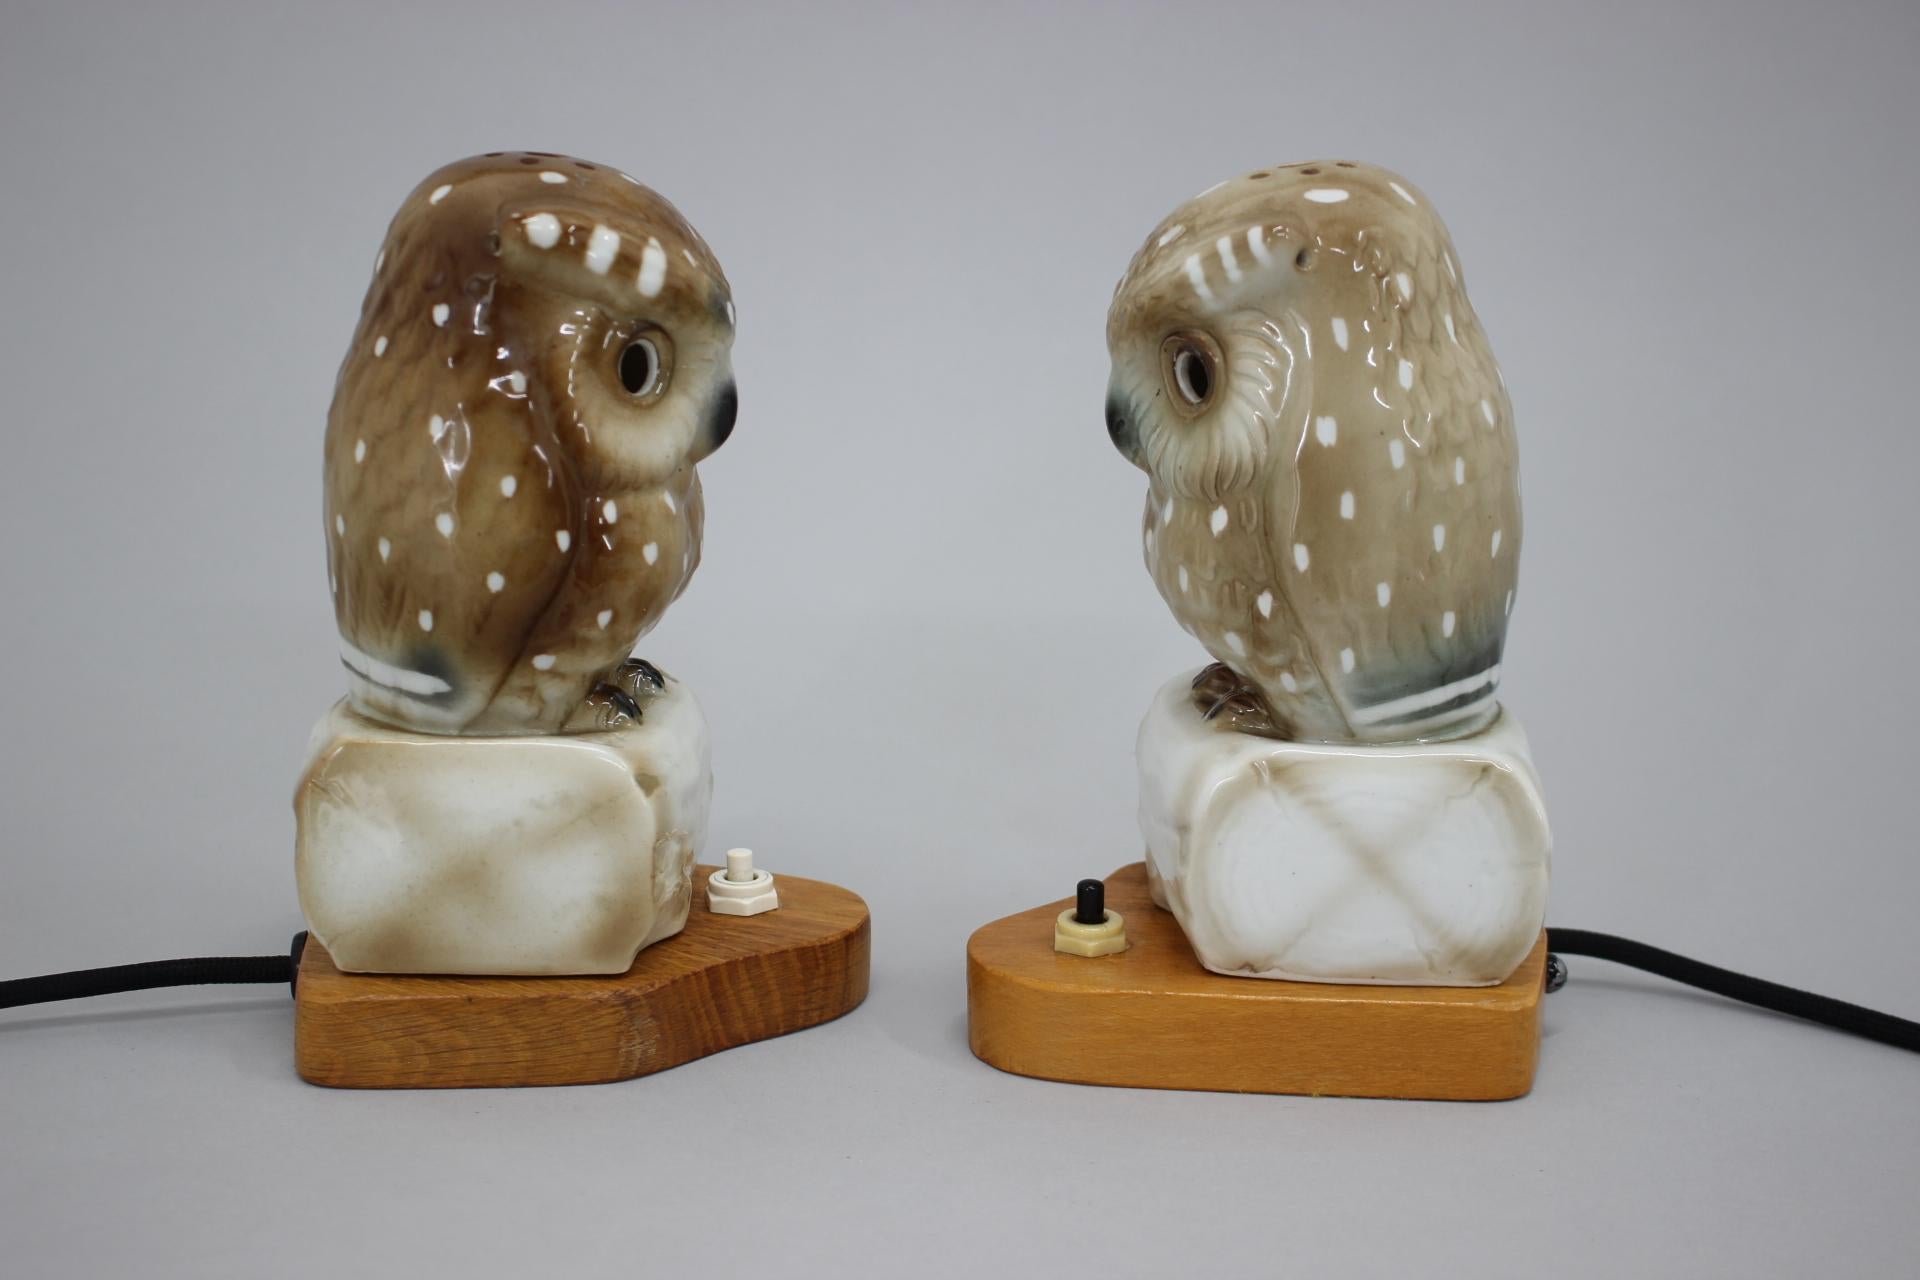 - newly rewired 
- Porcelain figure owls in very good condition.